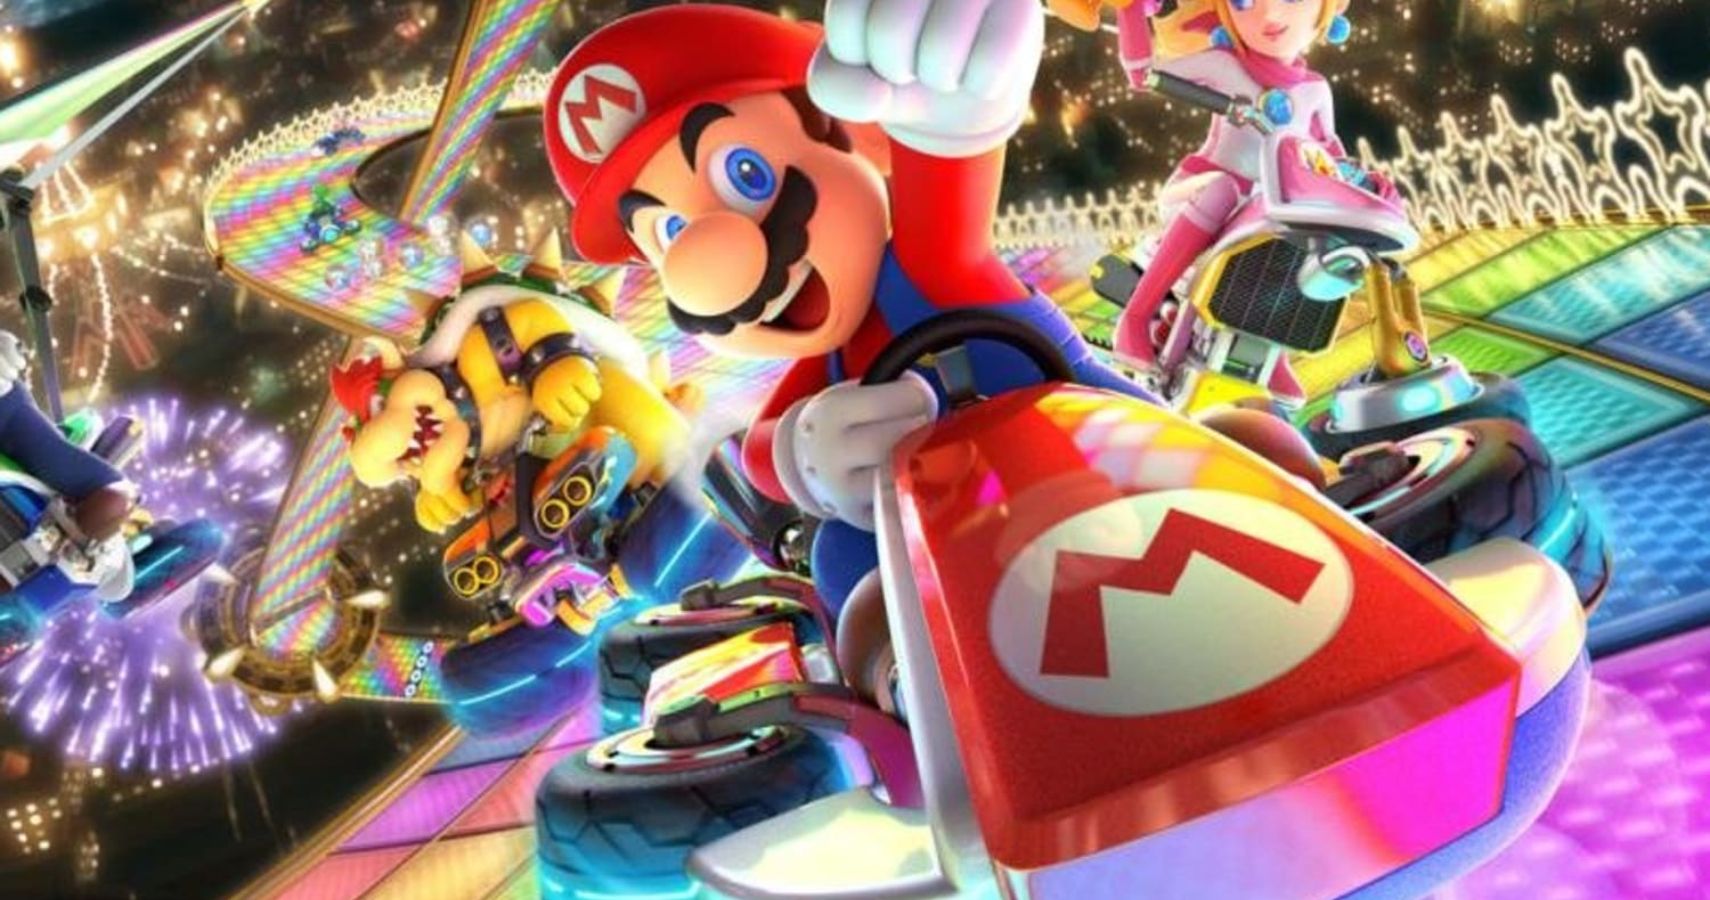 mario kart 8 download android free 4shared